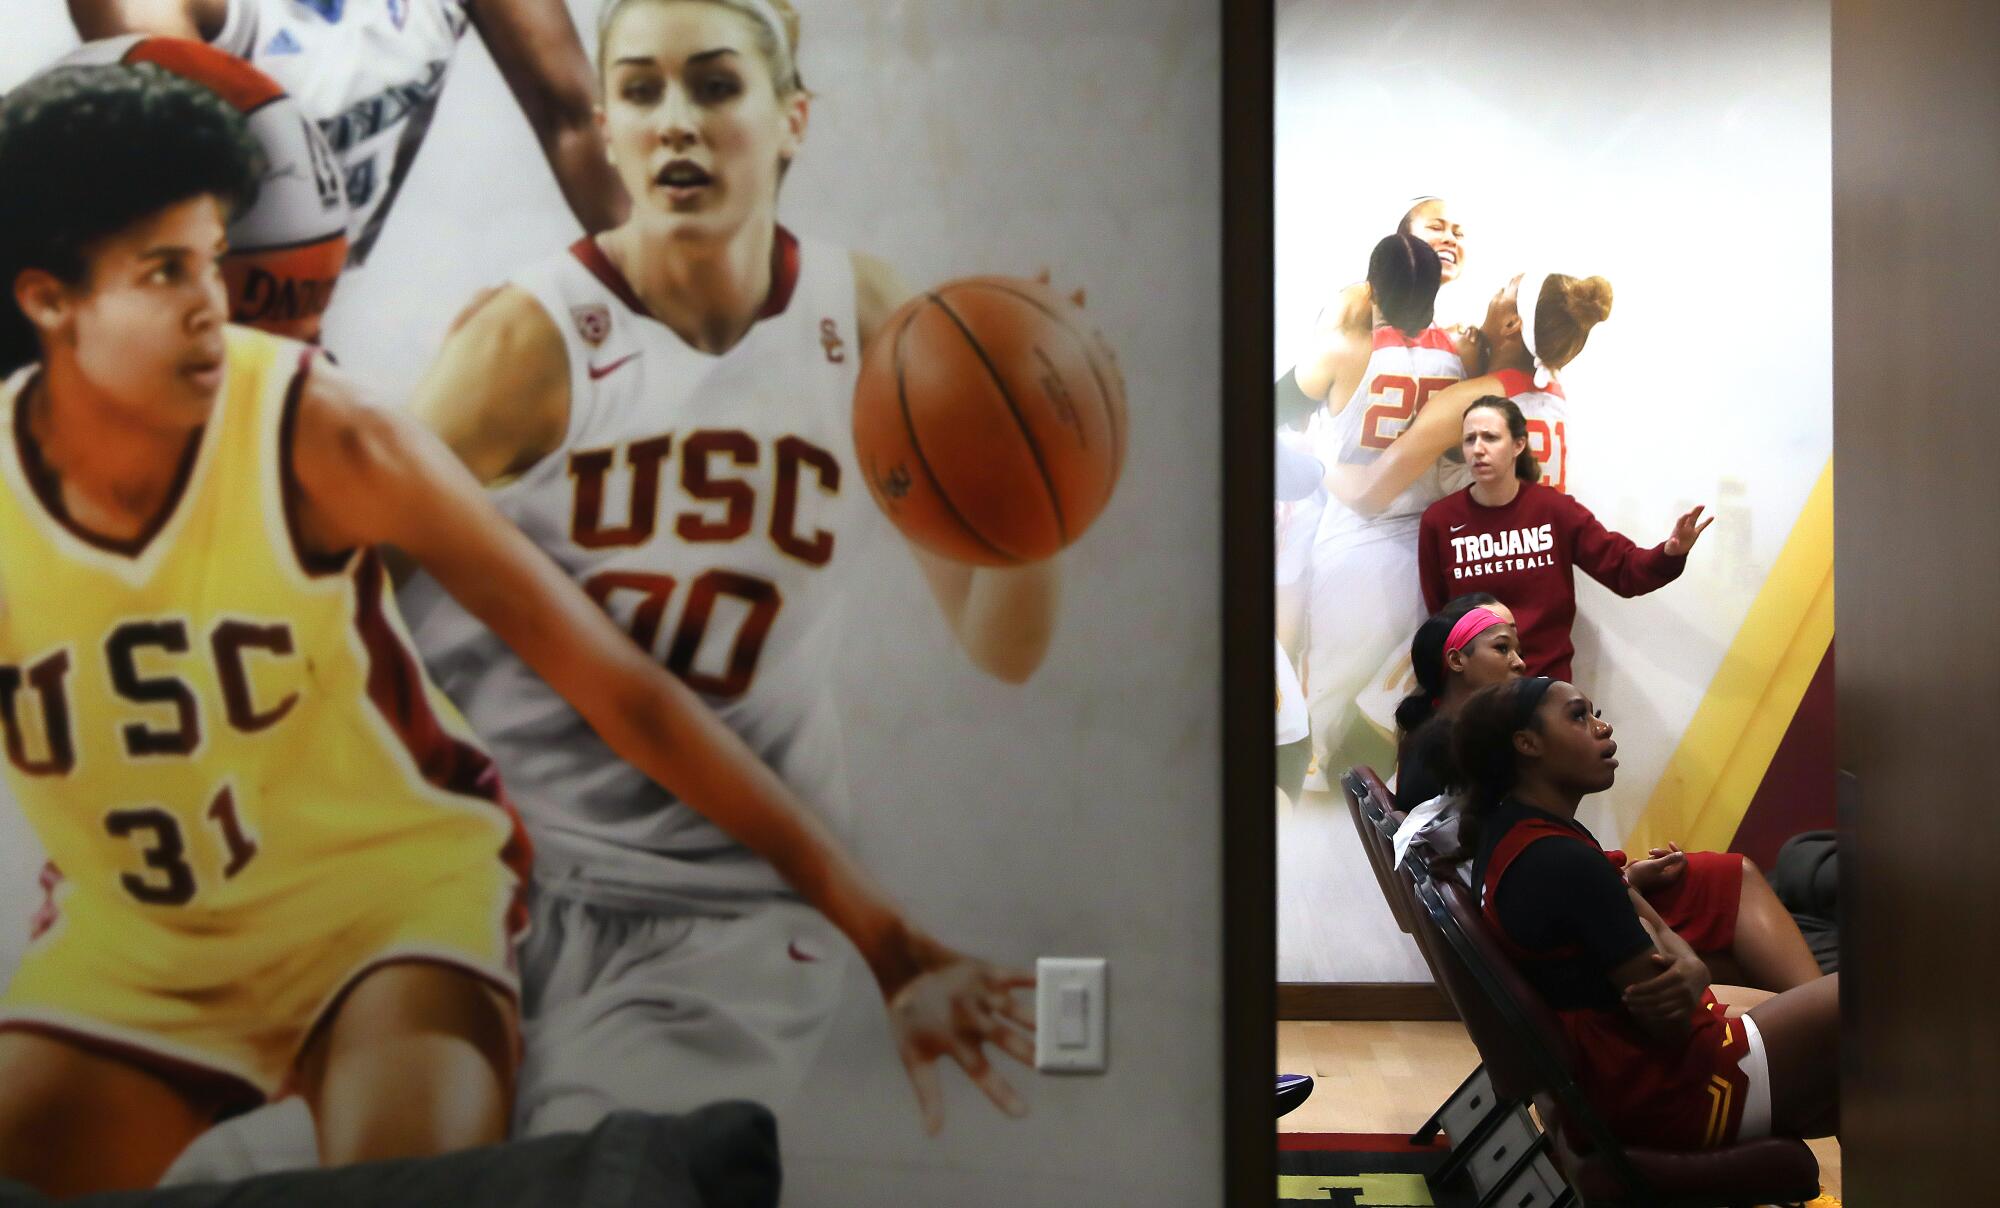 USC women's basketball head coach Lindsay Gottlieb watches film with her team.